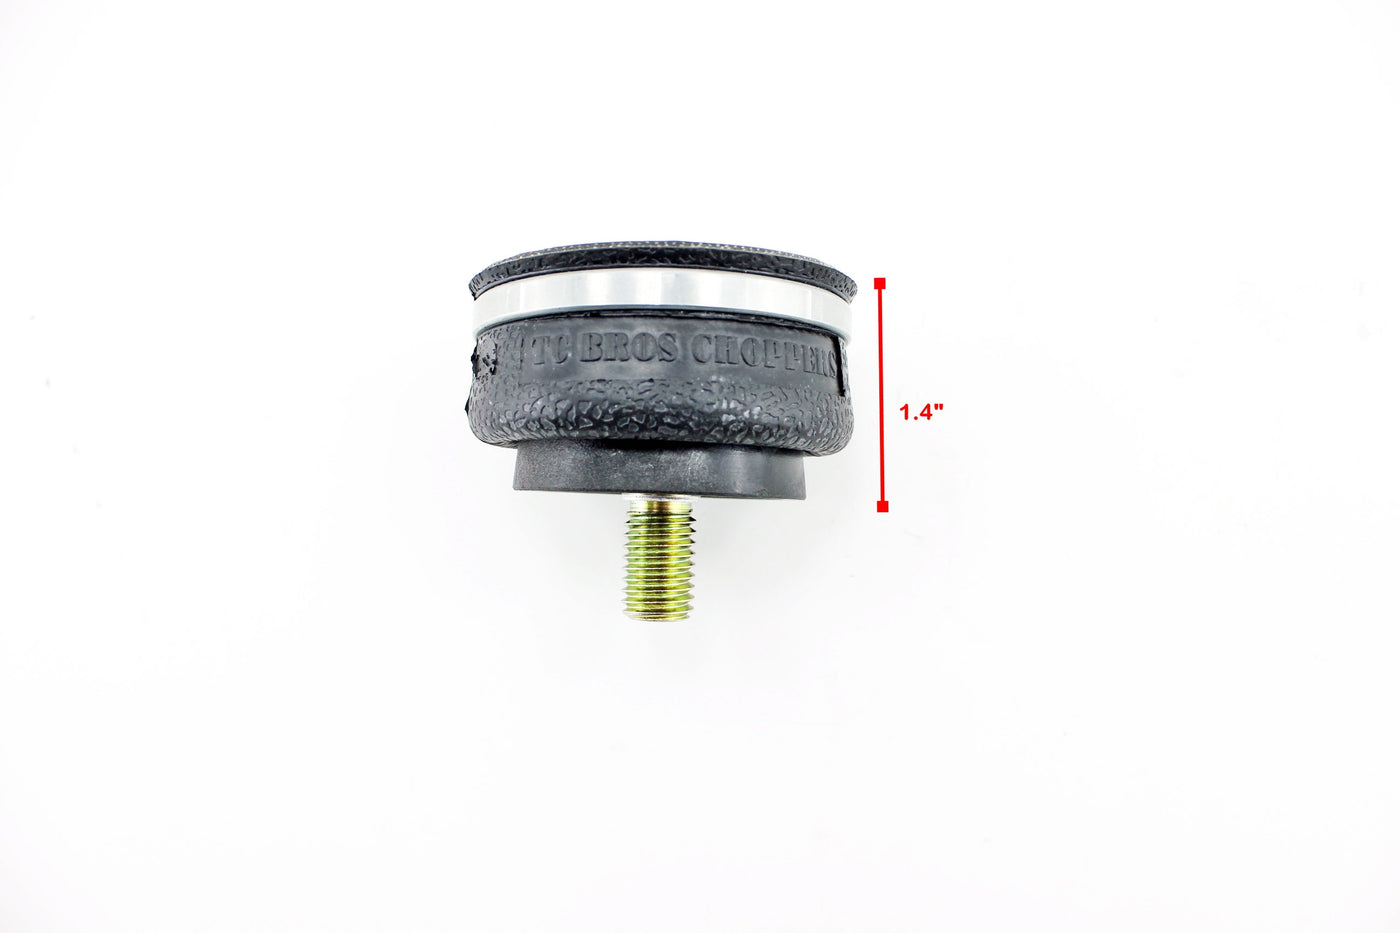 A TC Bros. screw with adjustability and a measurement on it.